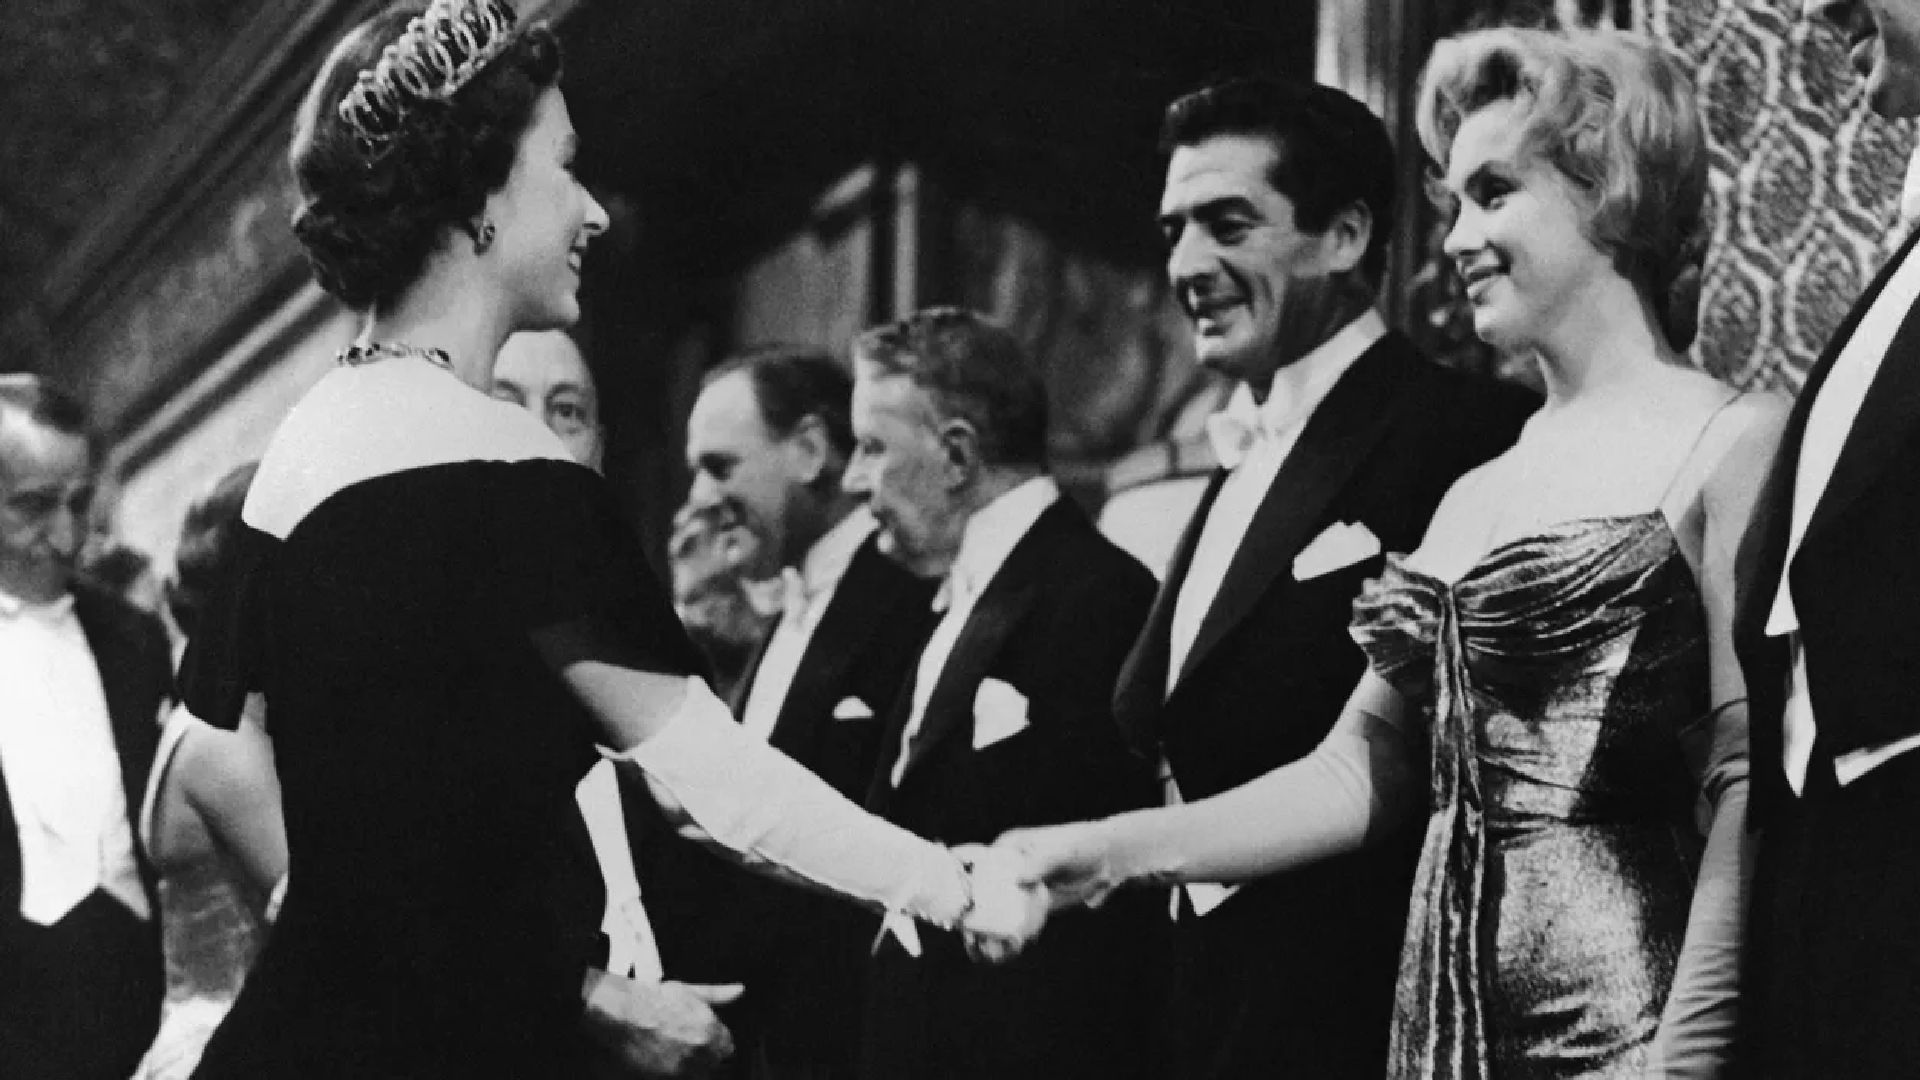 <p>                     Queen Elizabeth and movie star Marilyn Monroe were introduced in 1953 at the premiere of <em>The Battle of the River Plate</em> at Leicester Square in London. At the time both women were 30 years old and Marilyn even got the opportunity to shake the Queen’s hand as she attended the premiere to accompany her then-husband, Arthur Miller. The pair wore stunning gowns and the Queen also showcased the glittering pearl and diamond Vladimir tiara.                   </p>